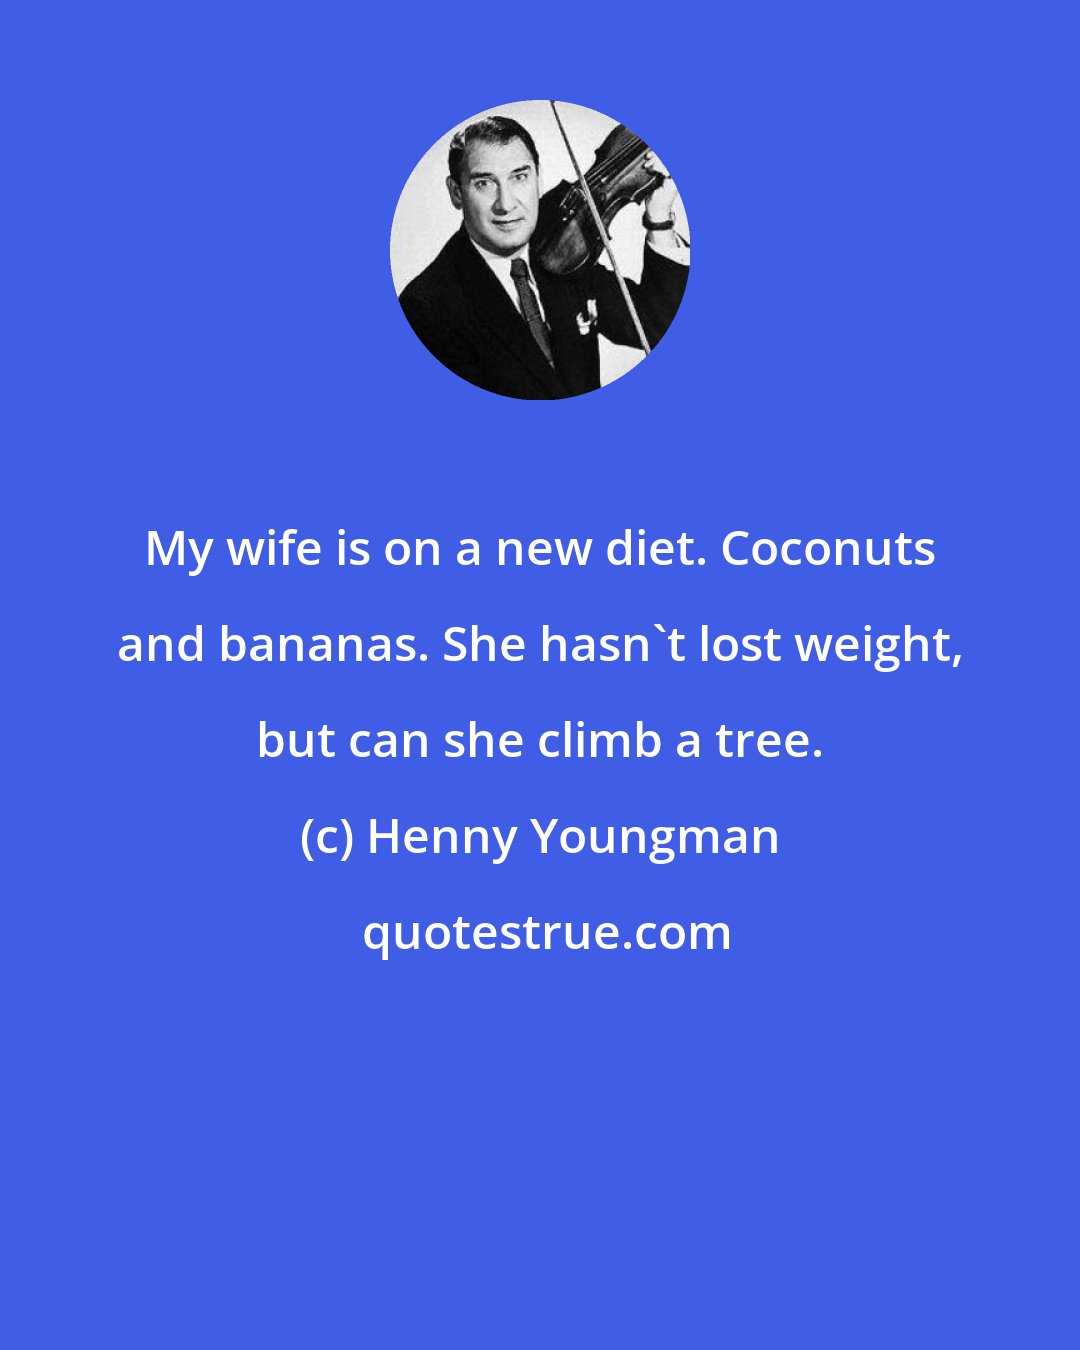 Henny Youngman: My wife is on a new diet. Coconuts and bananas. She hasn't lost weight, but can she climb a tree.